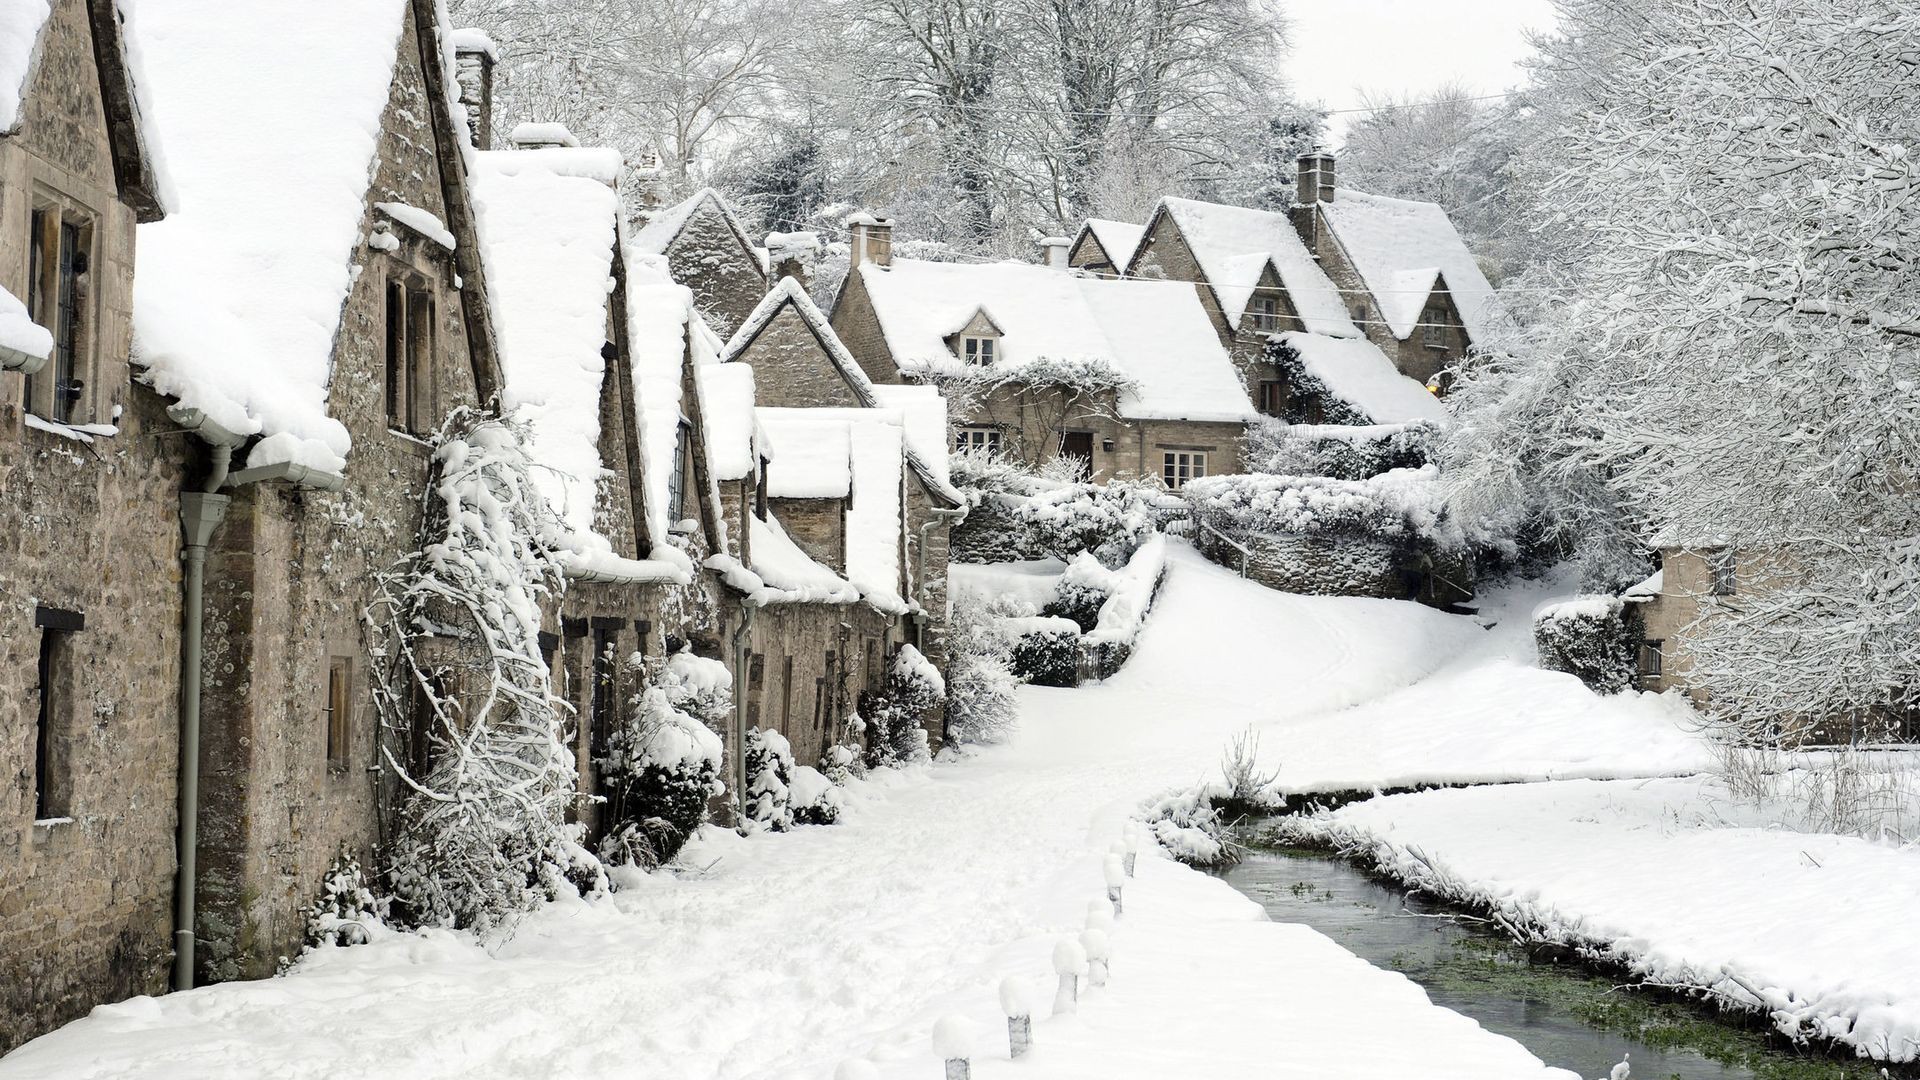 General 1920x1080 snow England winter town stream white house cold outdoors